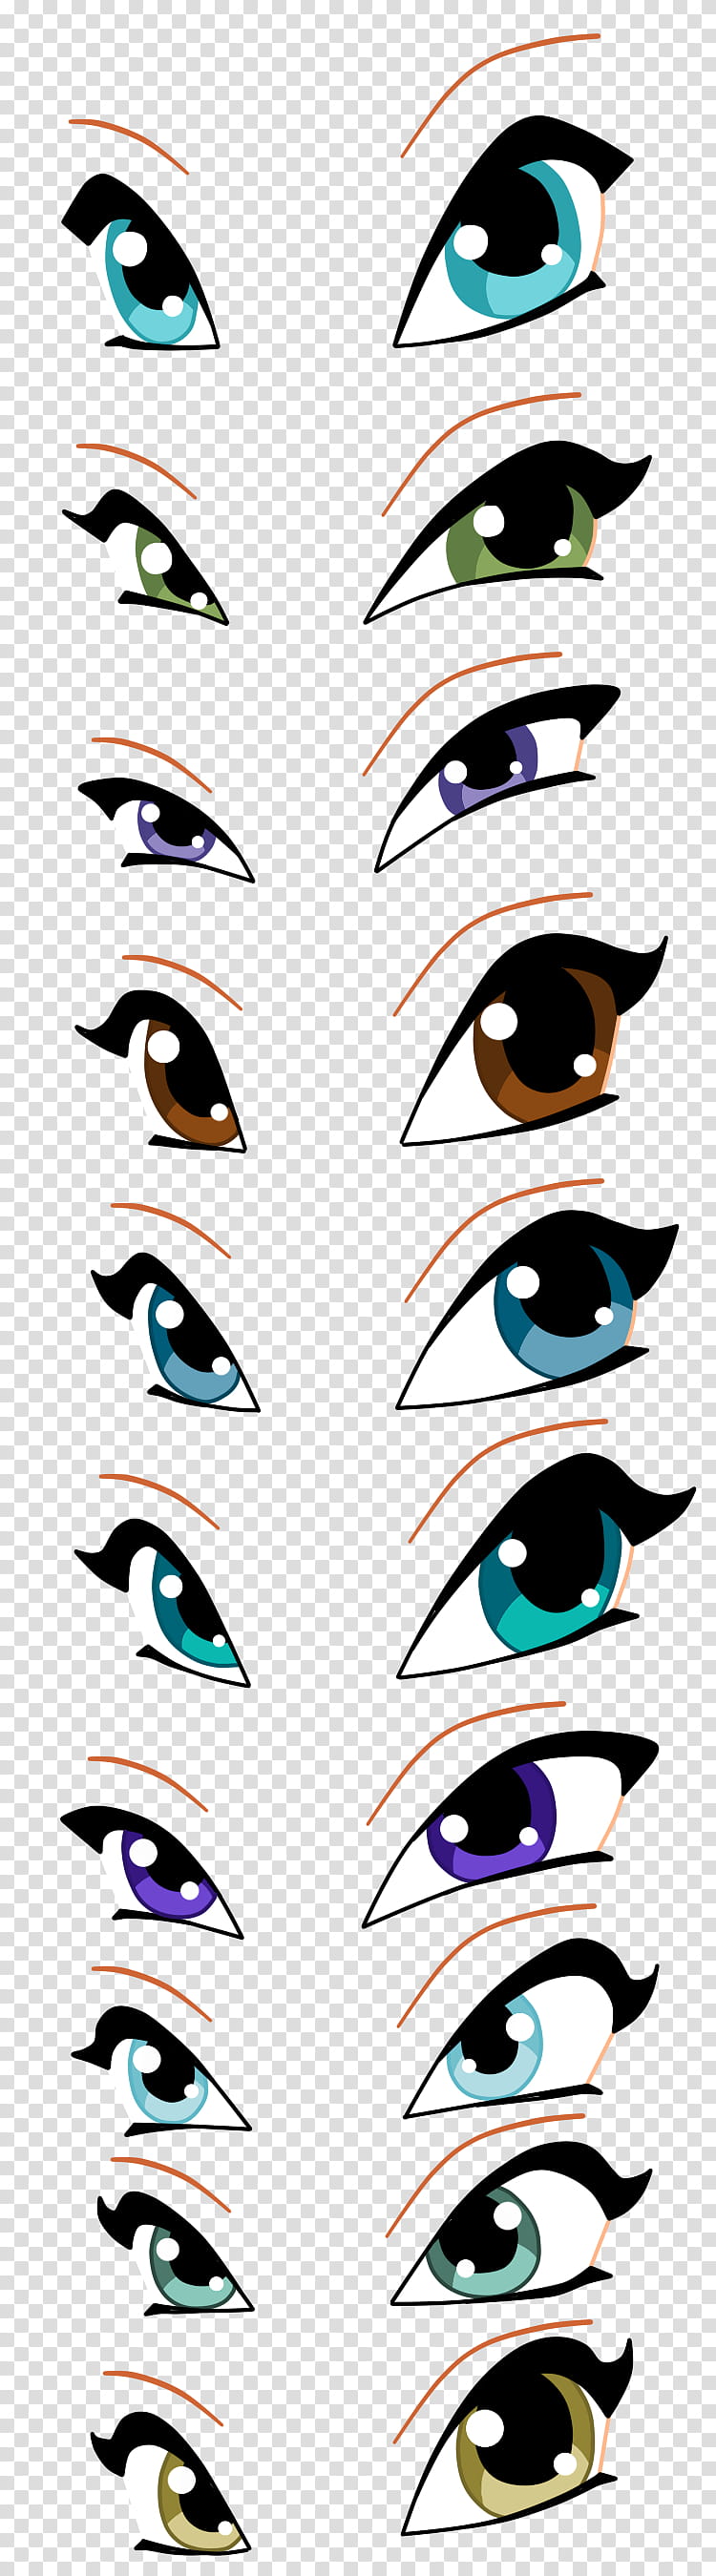 Winx club eyes base , assorted eye illustrations transparent background PNG clipart